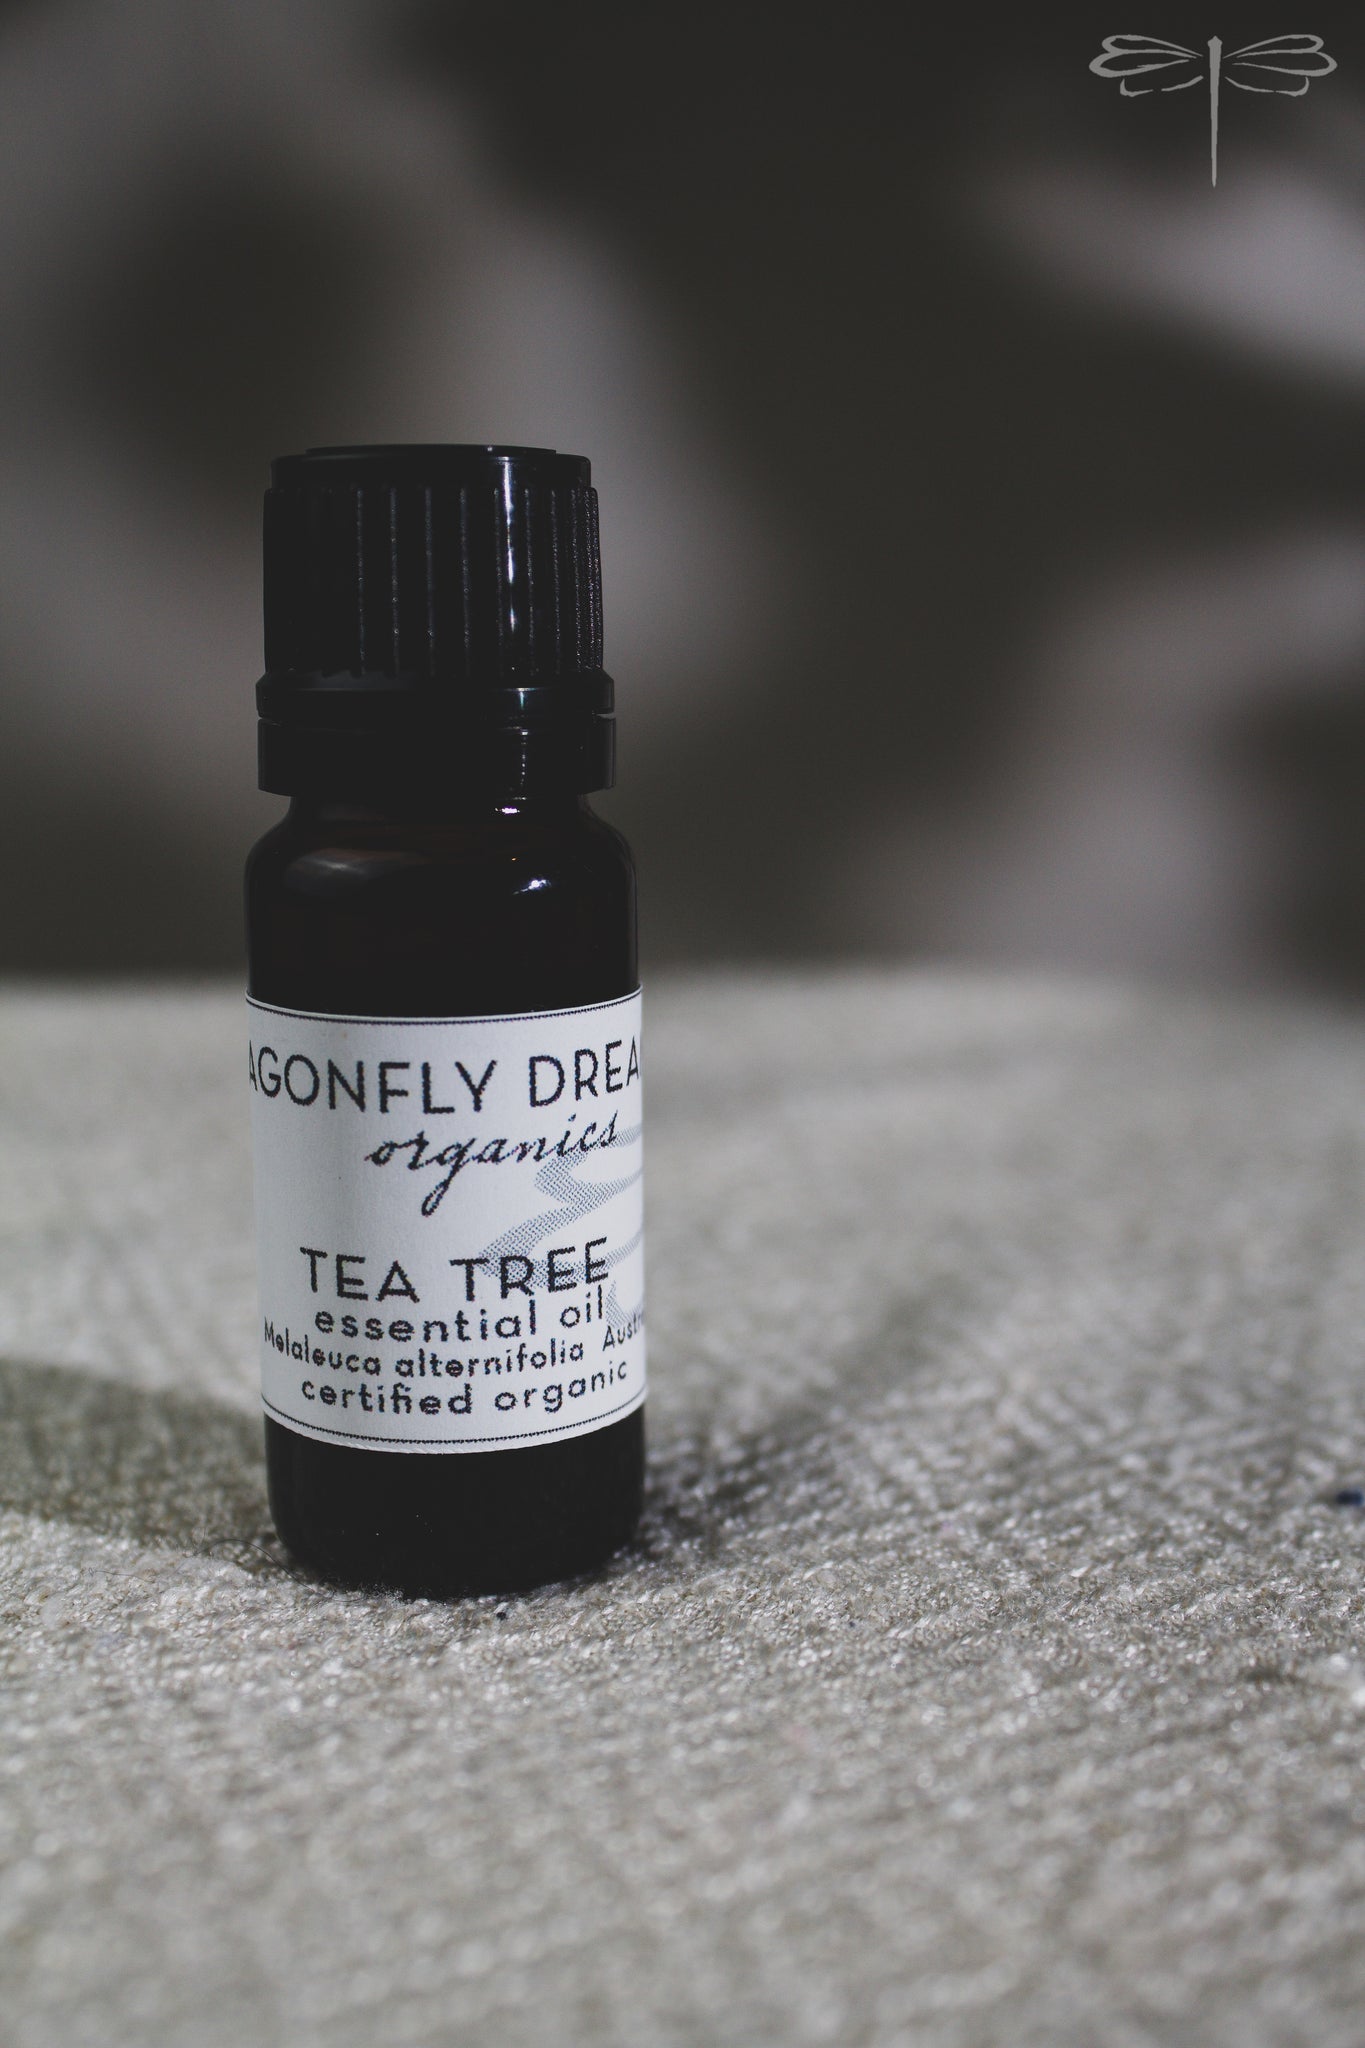 Pictured here, Certified Organic Tea Tree Essential Oil by Dragonfly Dreaming Organics